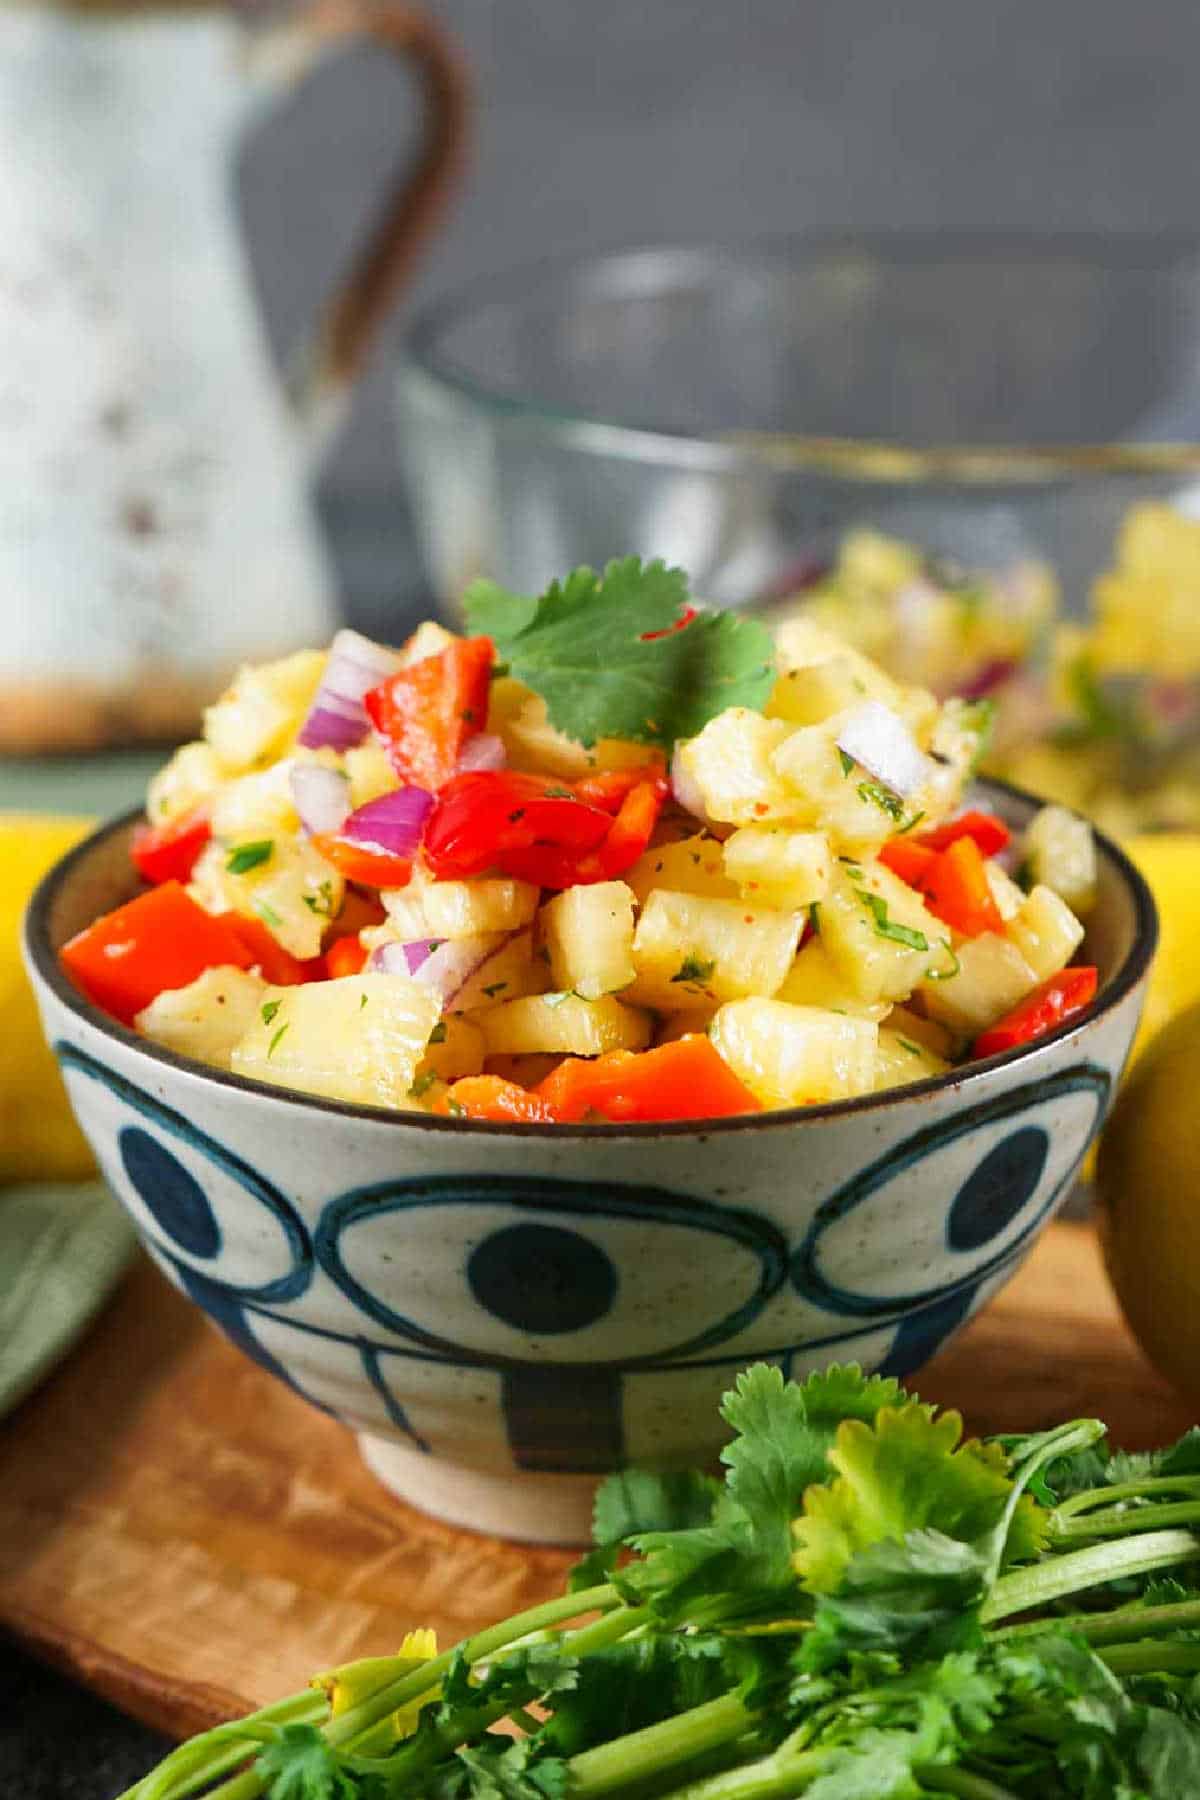 A bowl of vibrant pineapple salsa with diced red onions, red bell peppers, and cilantro, presented on a wooden table.